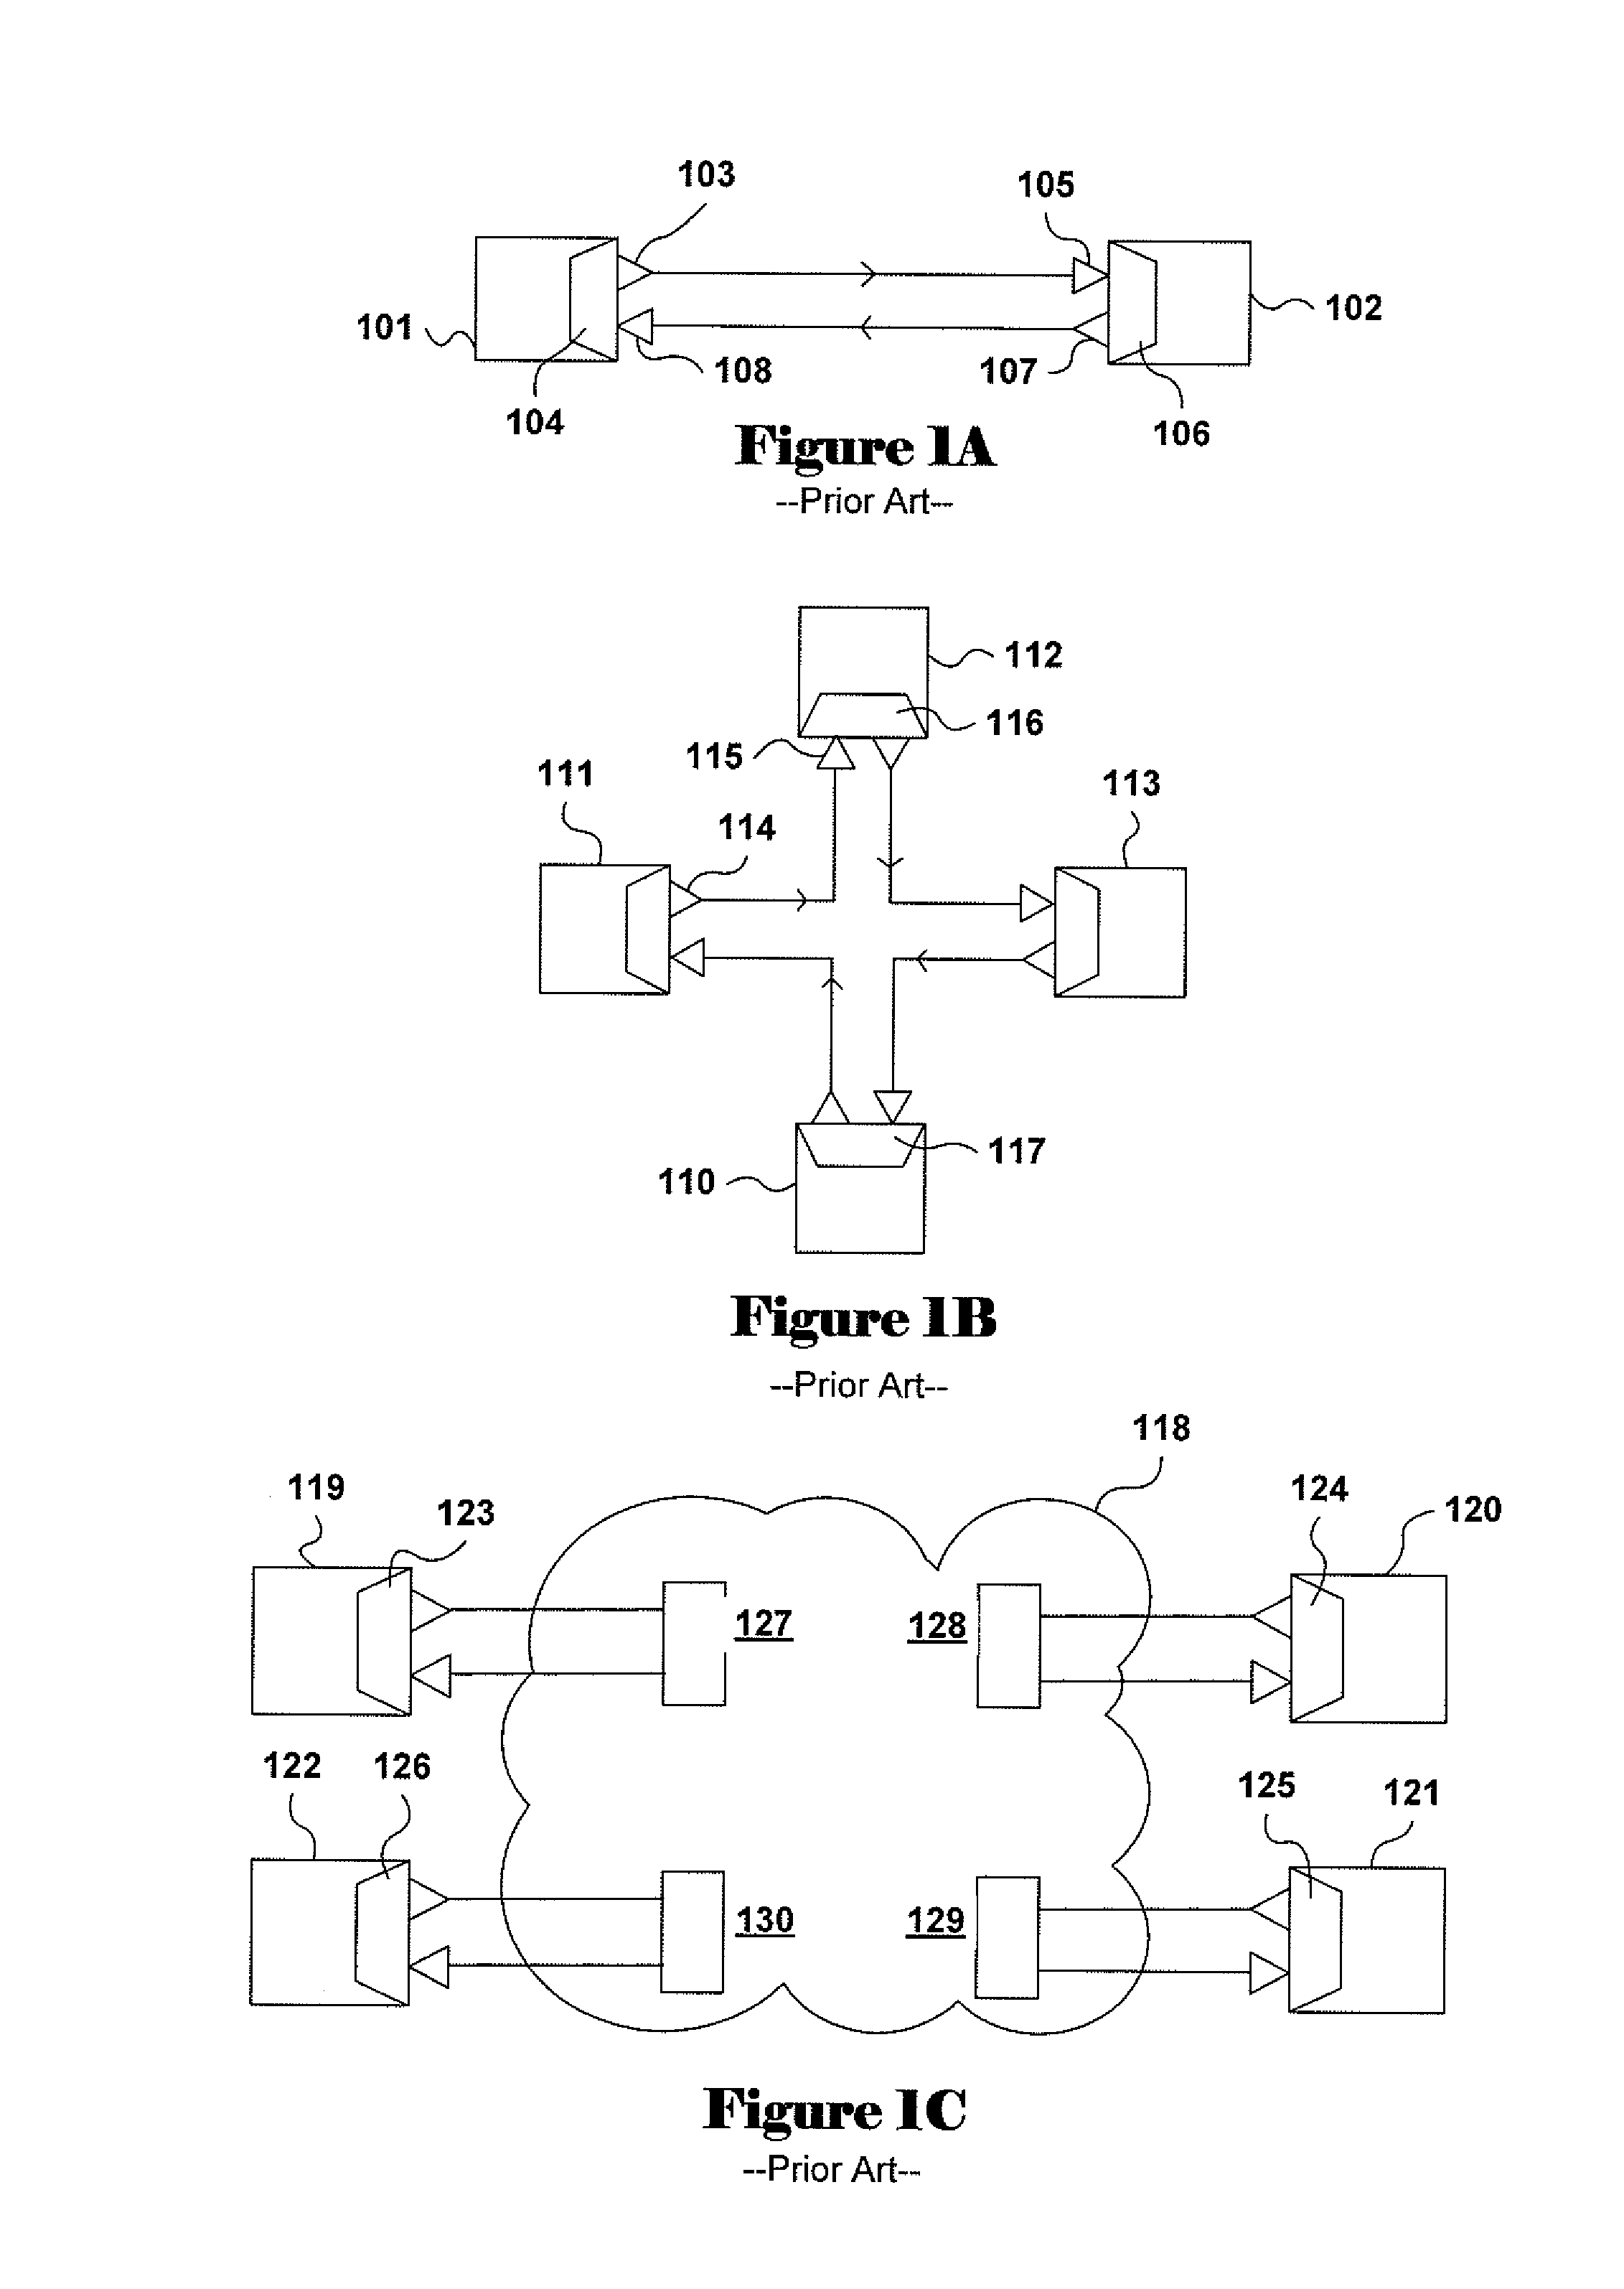 Alignment-unit-based virtual formatting methods and devices employing the methods